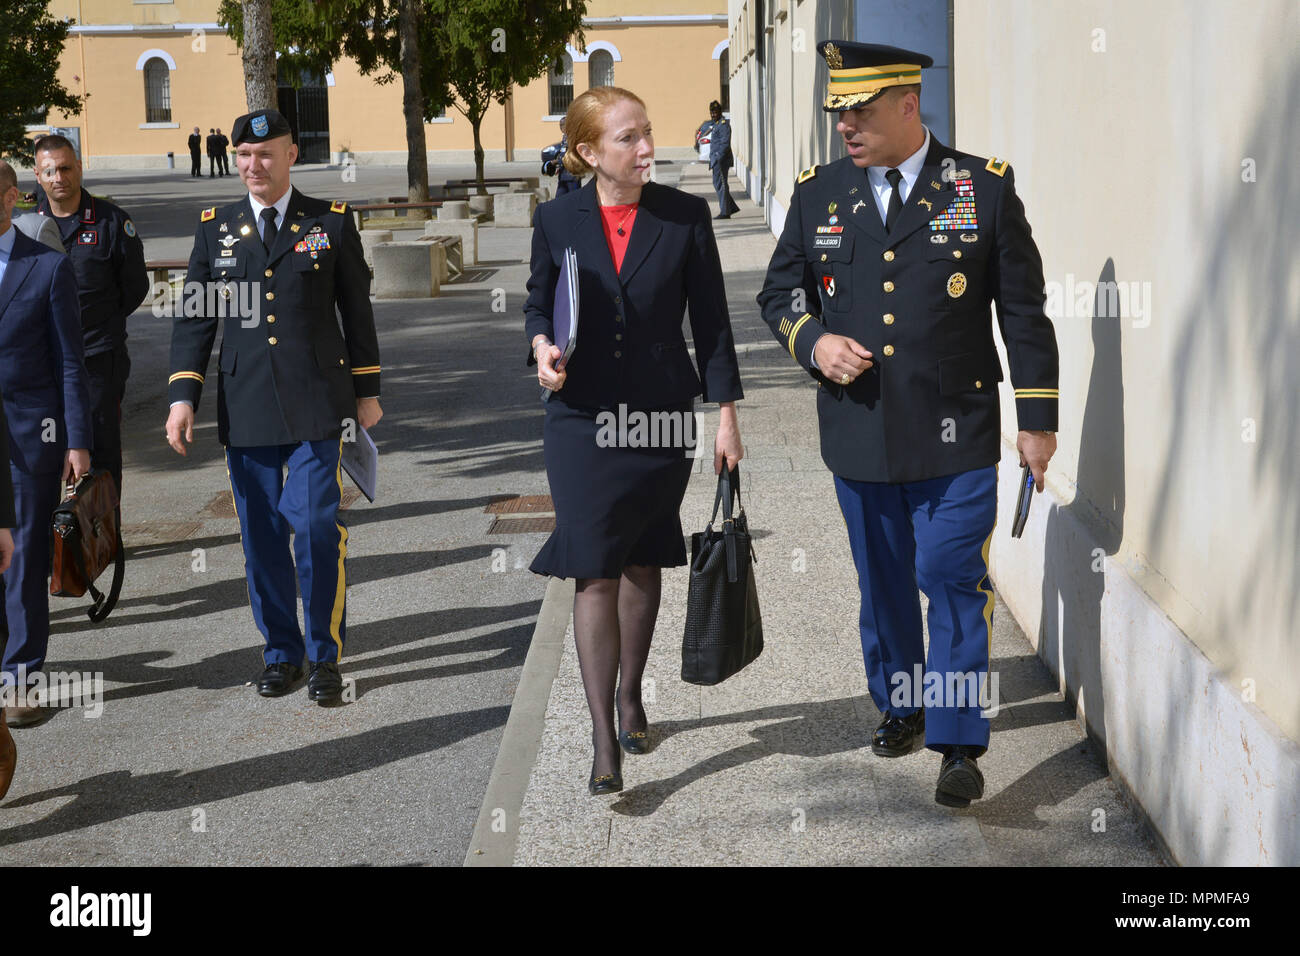 Ms. Kelly Degnan, Charge’ d’Affaires ad interim U.S. Embassy & Consulates Italy (left), and U.S. Army Col. Darius S. Gallegos, CoESPU deputy director (right), during visit at Center of Excellence for Stability Police Units (CoESPU) Vicenza, Italy, Mar. 30, 2017. (U.S. Army Photo by Visual Information Specialist Antonio Bedin) Stock Photo